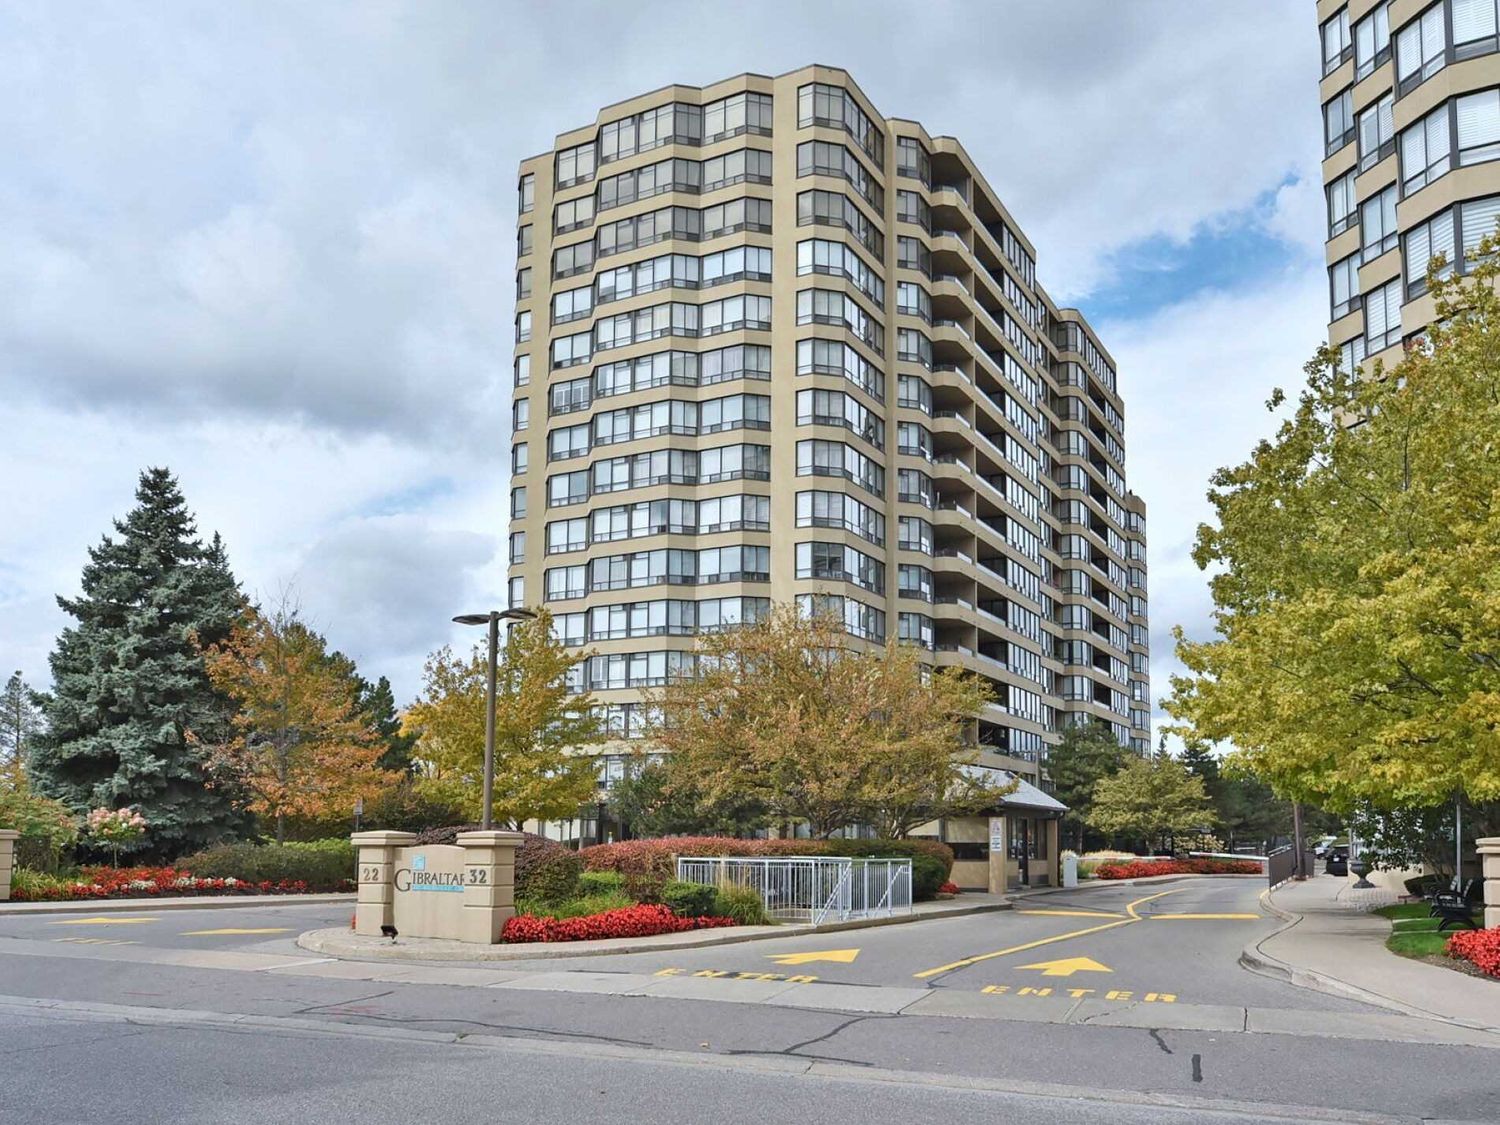 22 Clarissa Drive. Gibraltar Condos is located in  Richmond Hill, Toronto - image #2 of 3